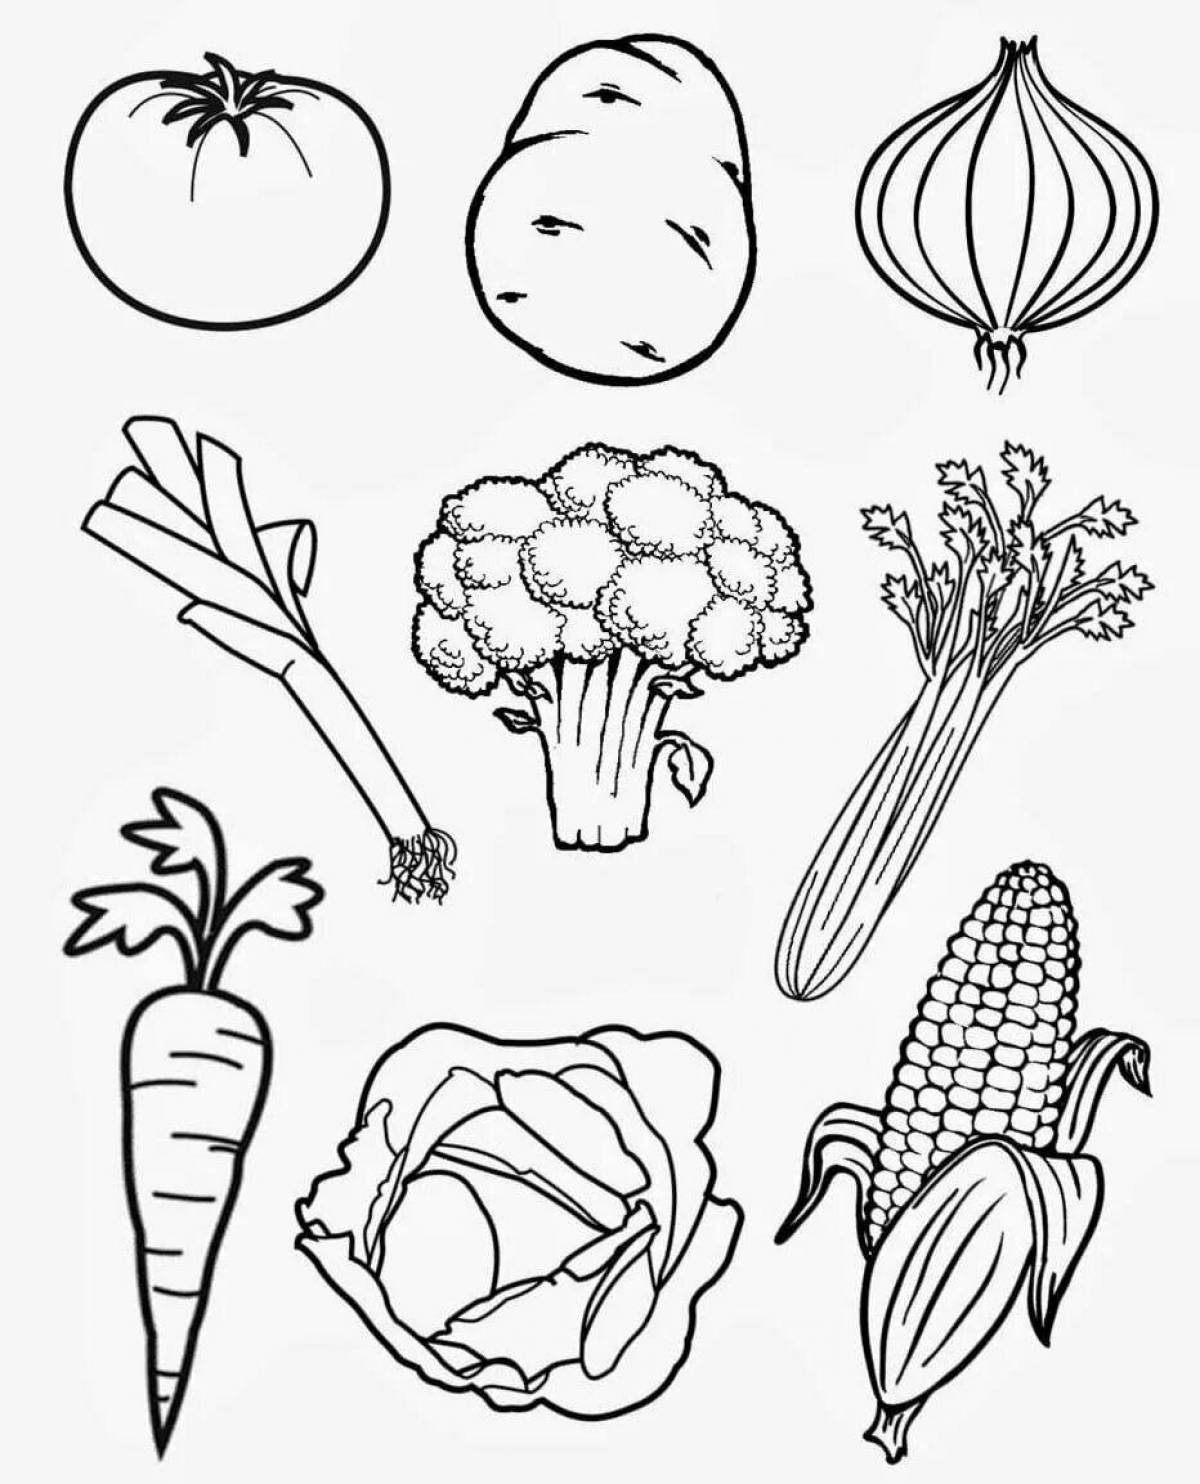 Fun vegetable coloring book for 3-4 year olds